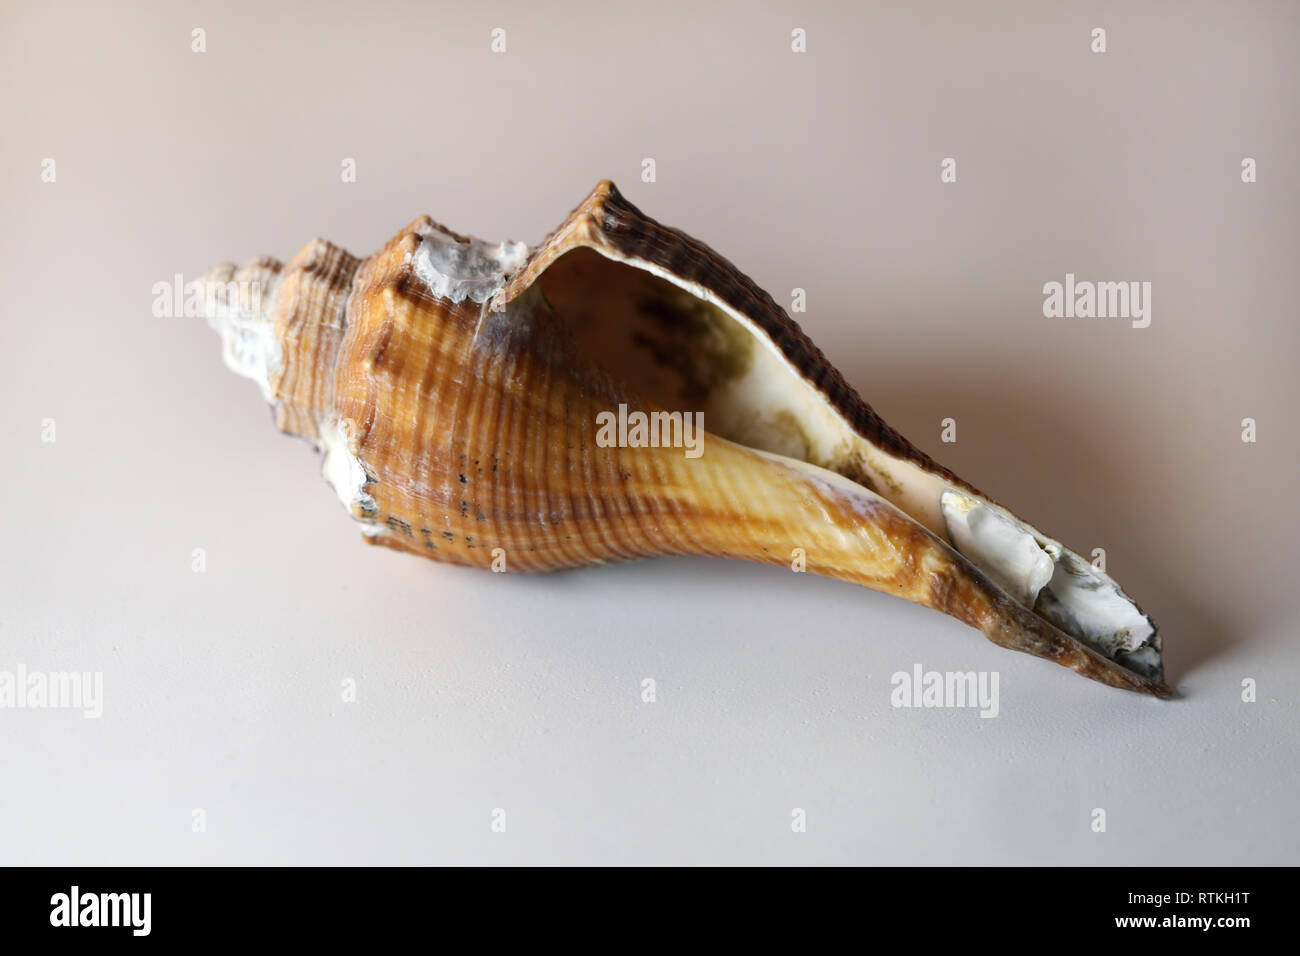 Still life photo of a beautiful white & brown sea mollusk shell on a white table. Lovely souvenir from a vacation by the sea. Macro image with colors. Stock Photo